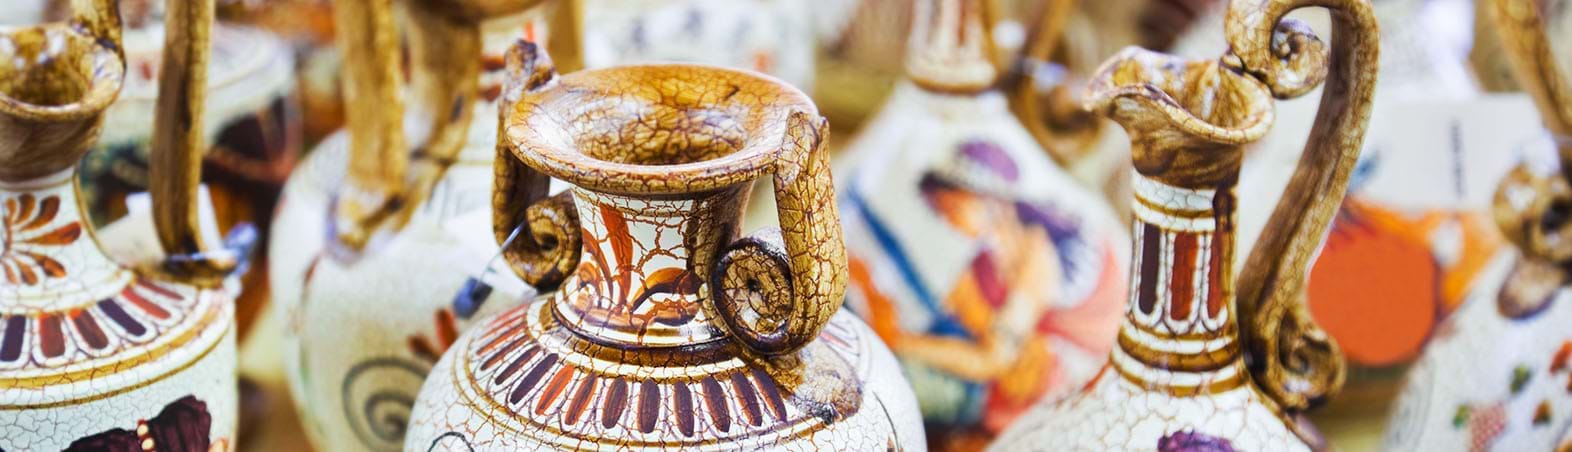 What to Buy and from Where? Your Mysore Shopping Guide!